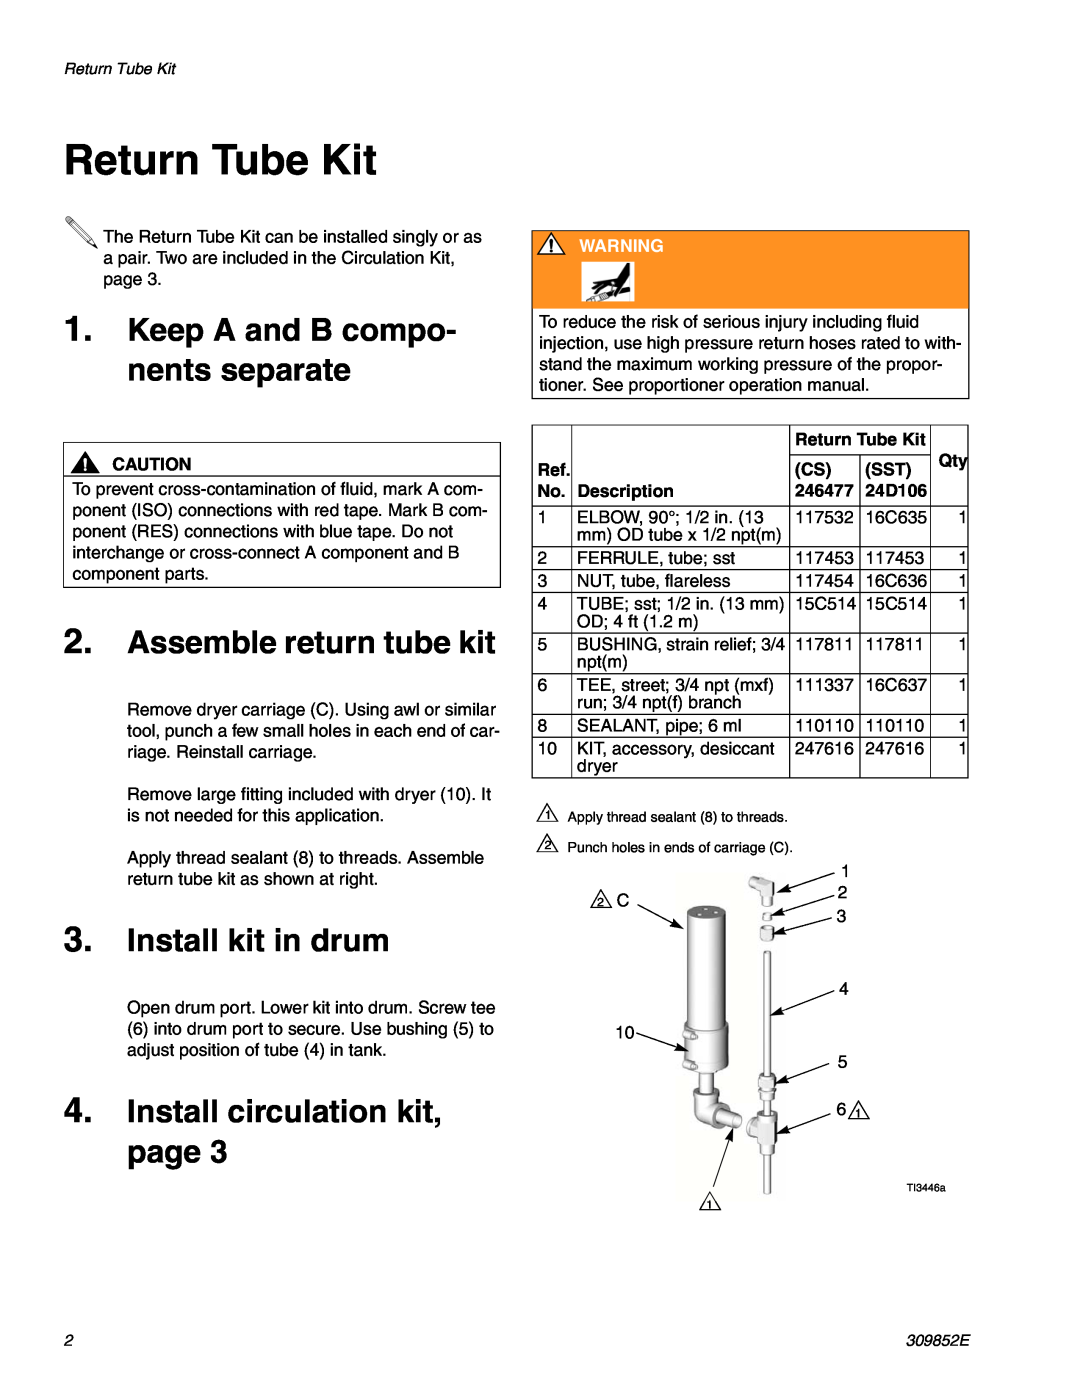 Graco 24D107 Return Tube Kit, Keep A and B compo- nents separate, Assemble return tube kit, Install kit in drum, 246477 